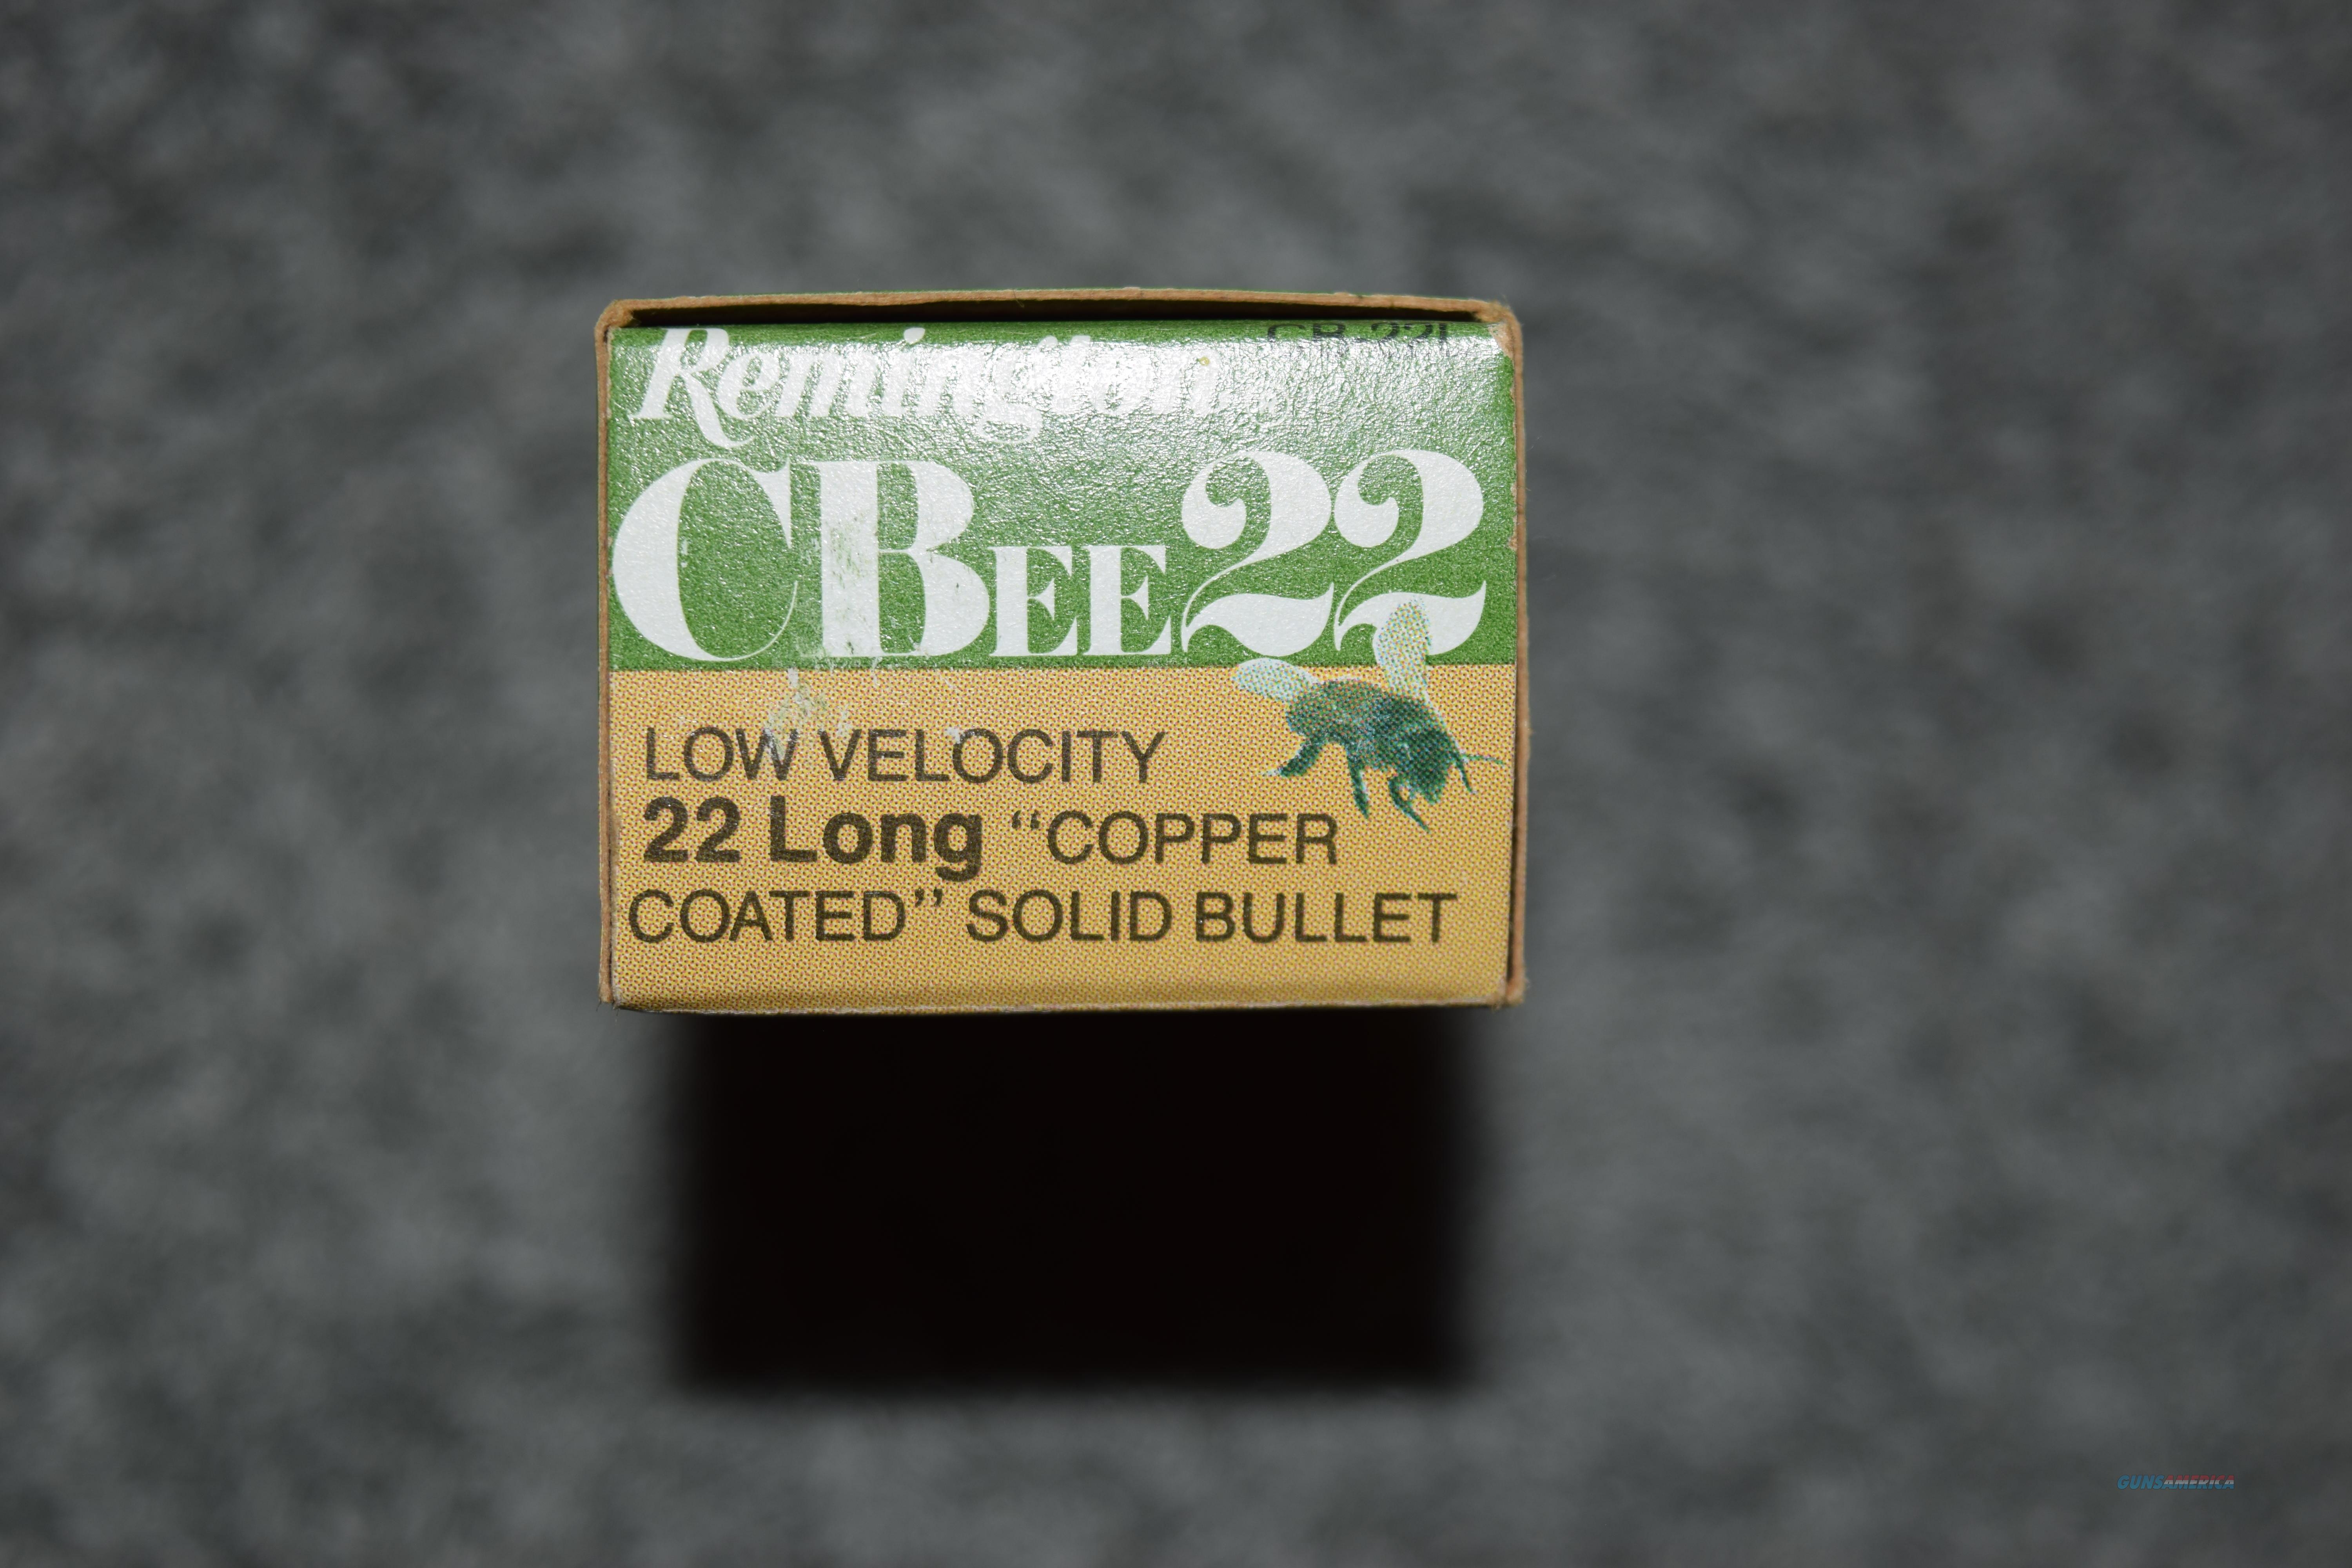 50 Rounds Of Remington 22 Cbee22 For Sale At 908334663